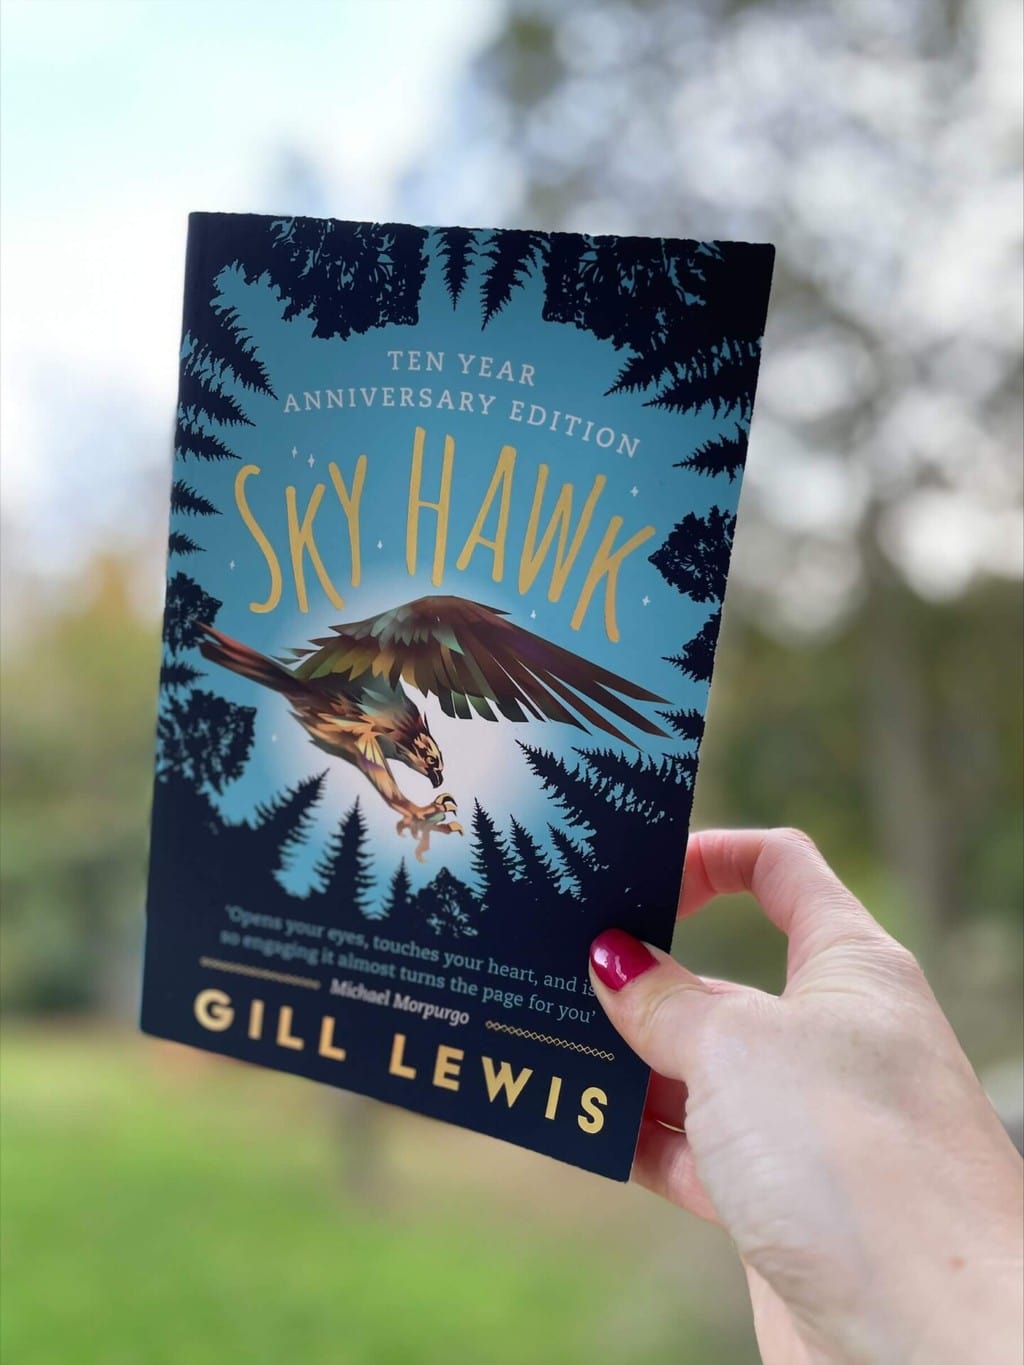 ky Hawk - Gill Lewis (author), Oxford University Press (publisher), recommended reading age: 10 plus